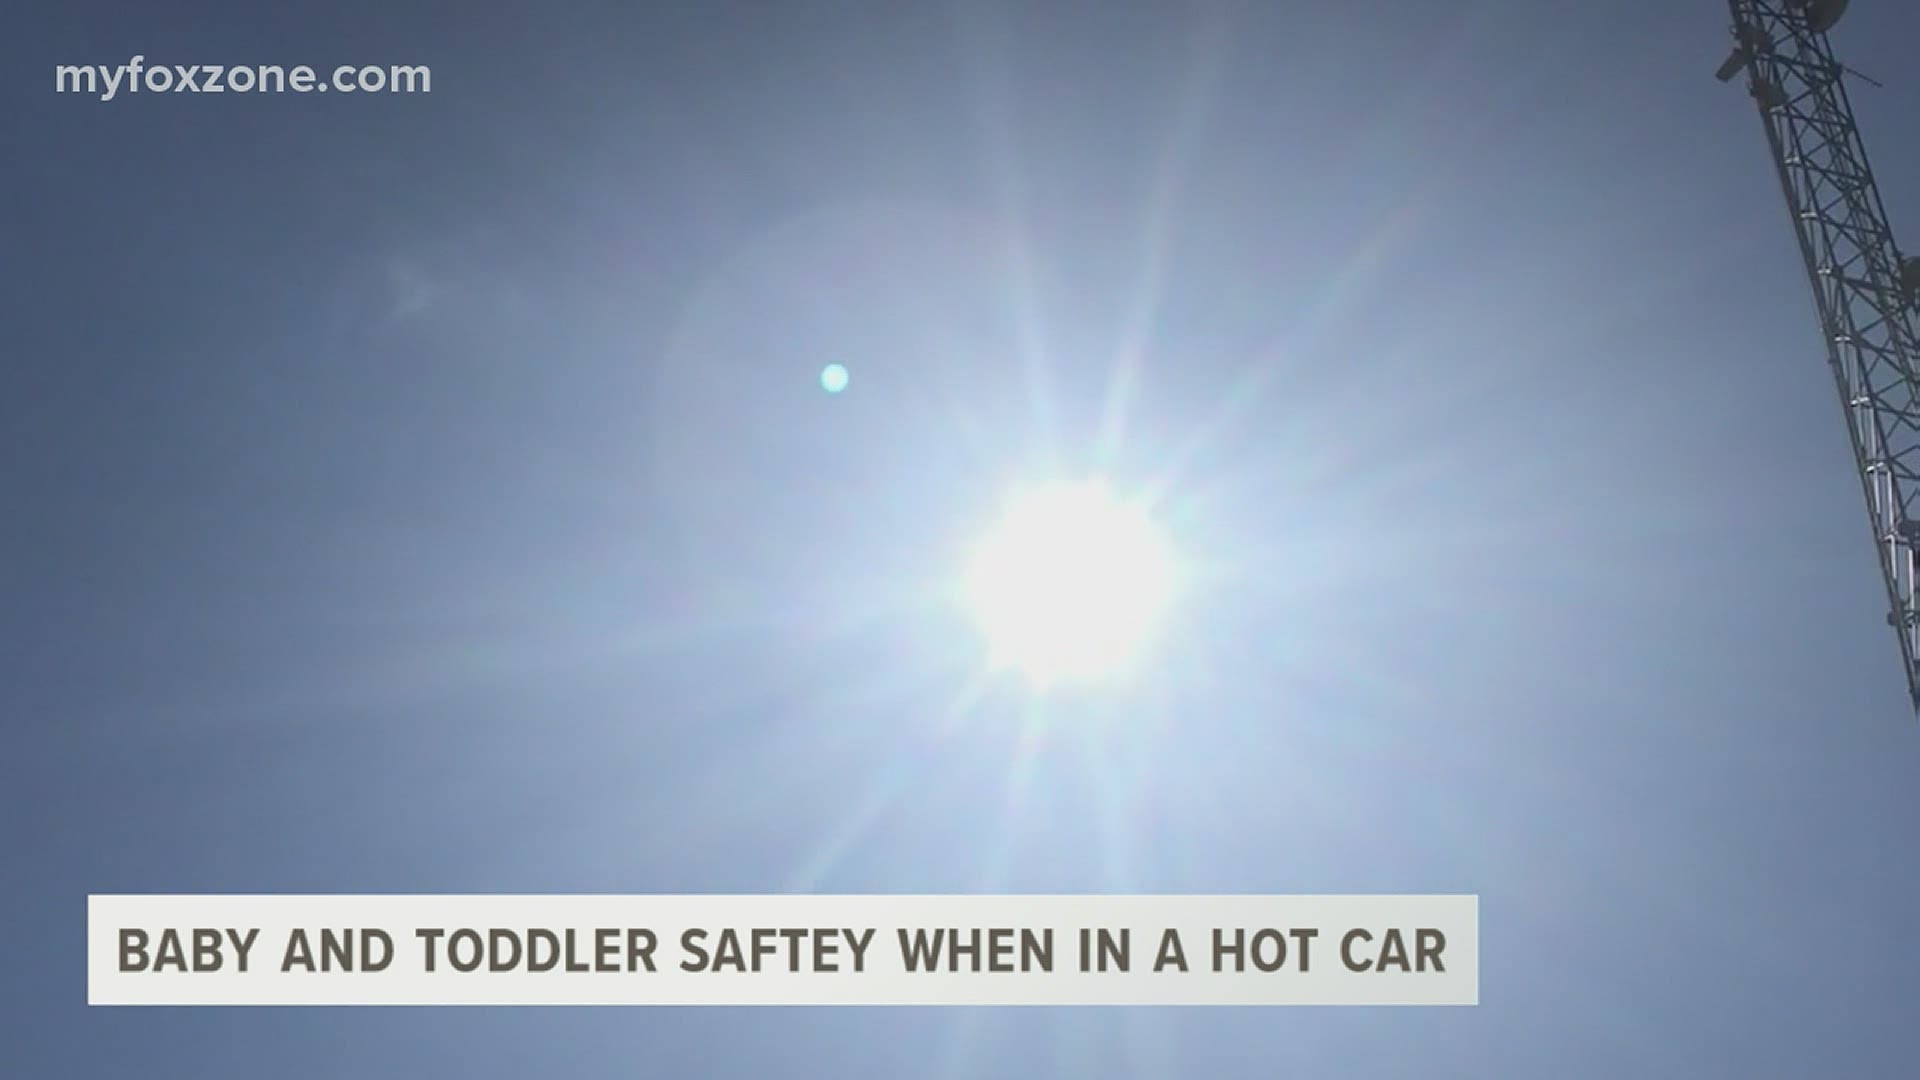 With temperatures hitting the triple digits in Texas, it is advised to keep children as cool as possible while in vehicles.